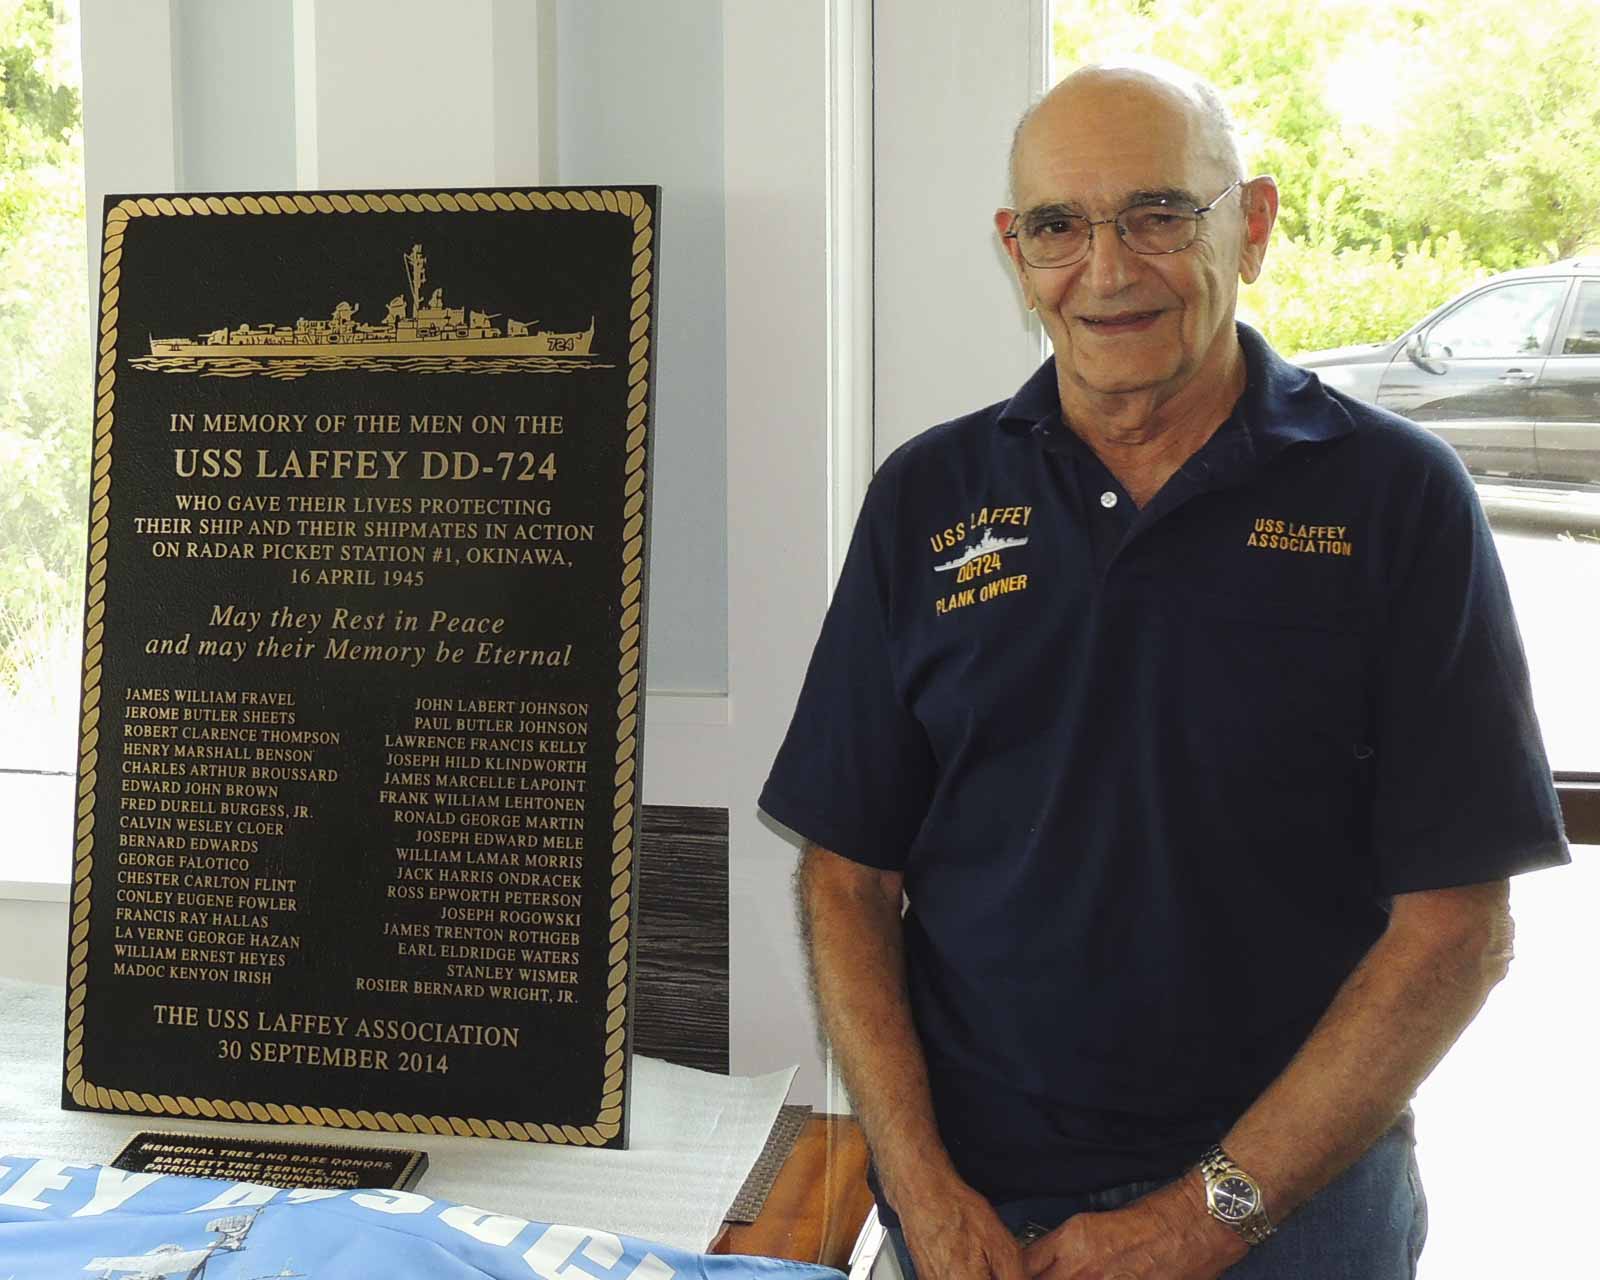 The USS Laffey Owner - Patriots Point Foundation